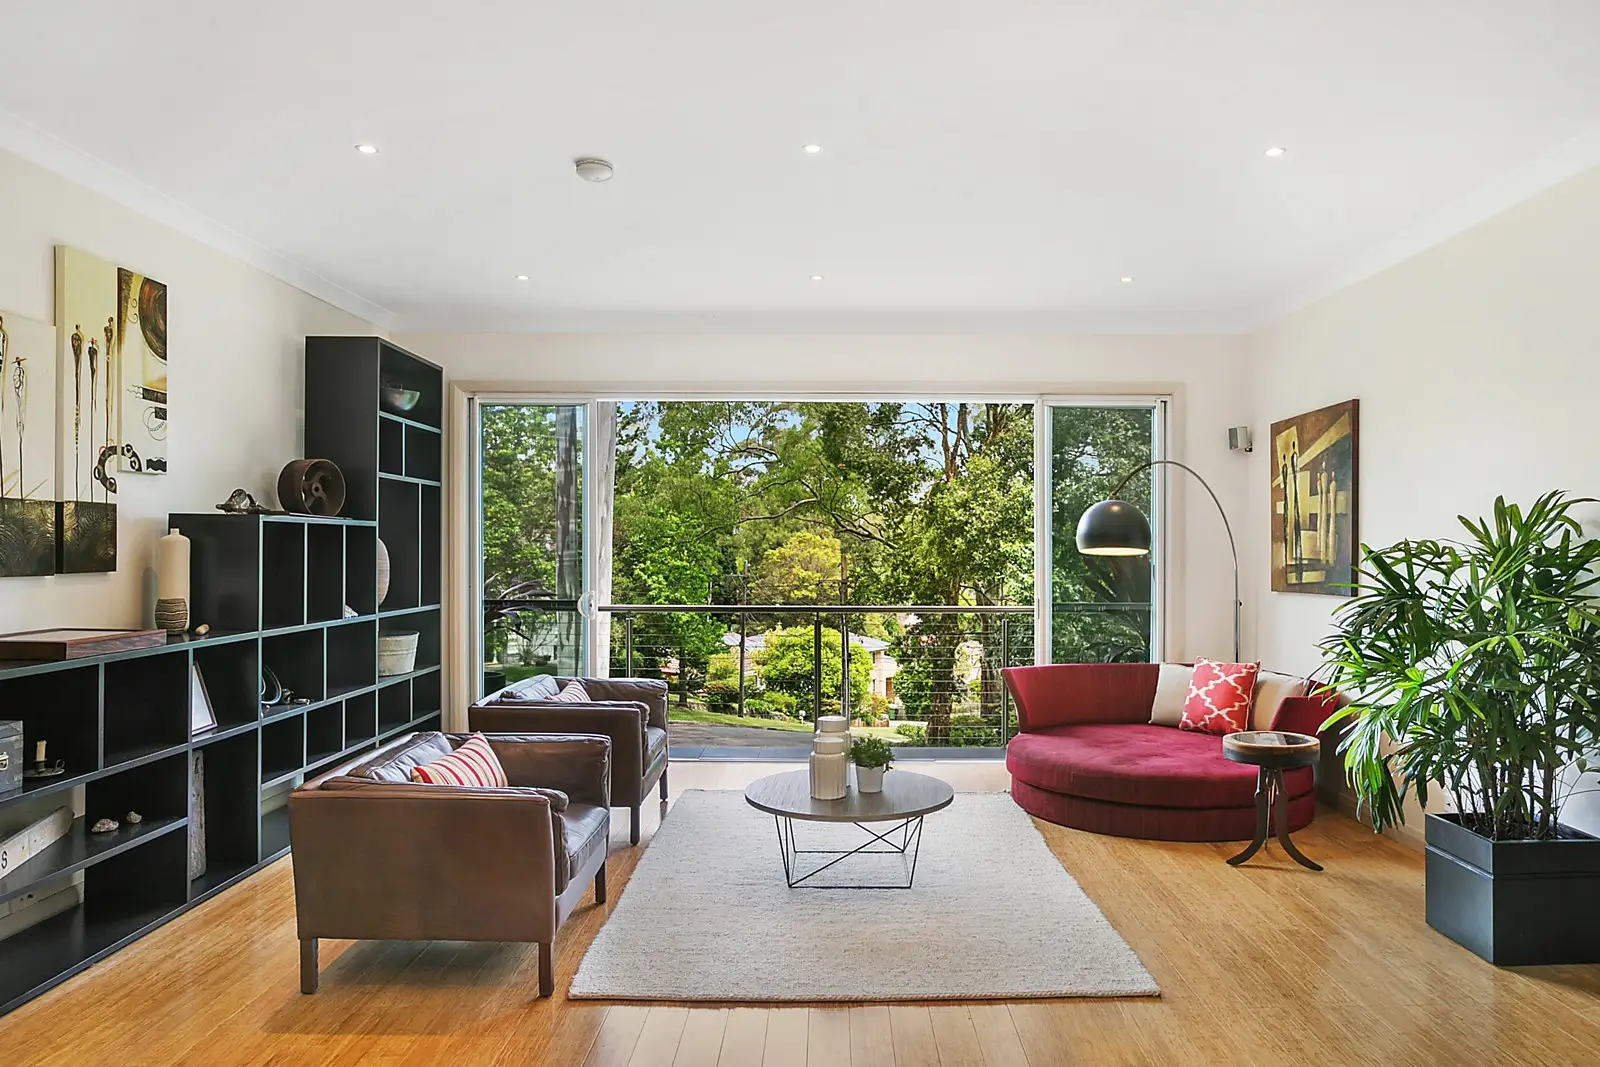 Photo #3: 14 Albion Avenue, Pymble - Sold by Sydney Sotheby's International Realty